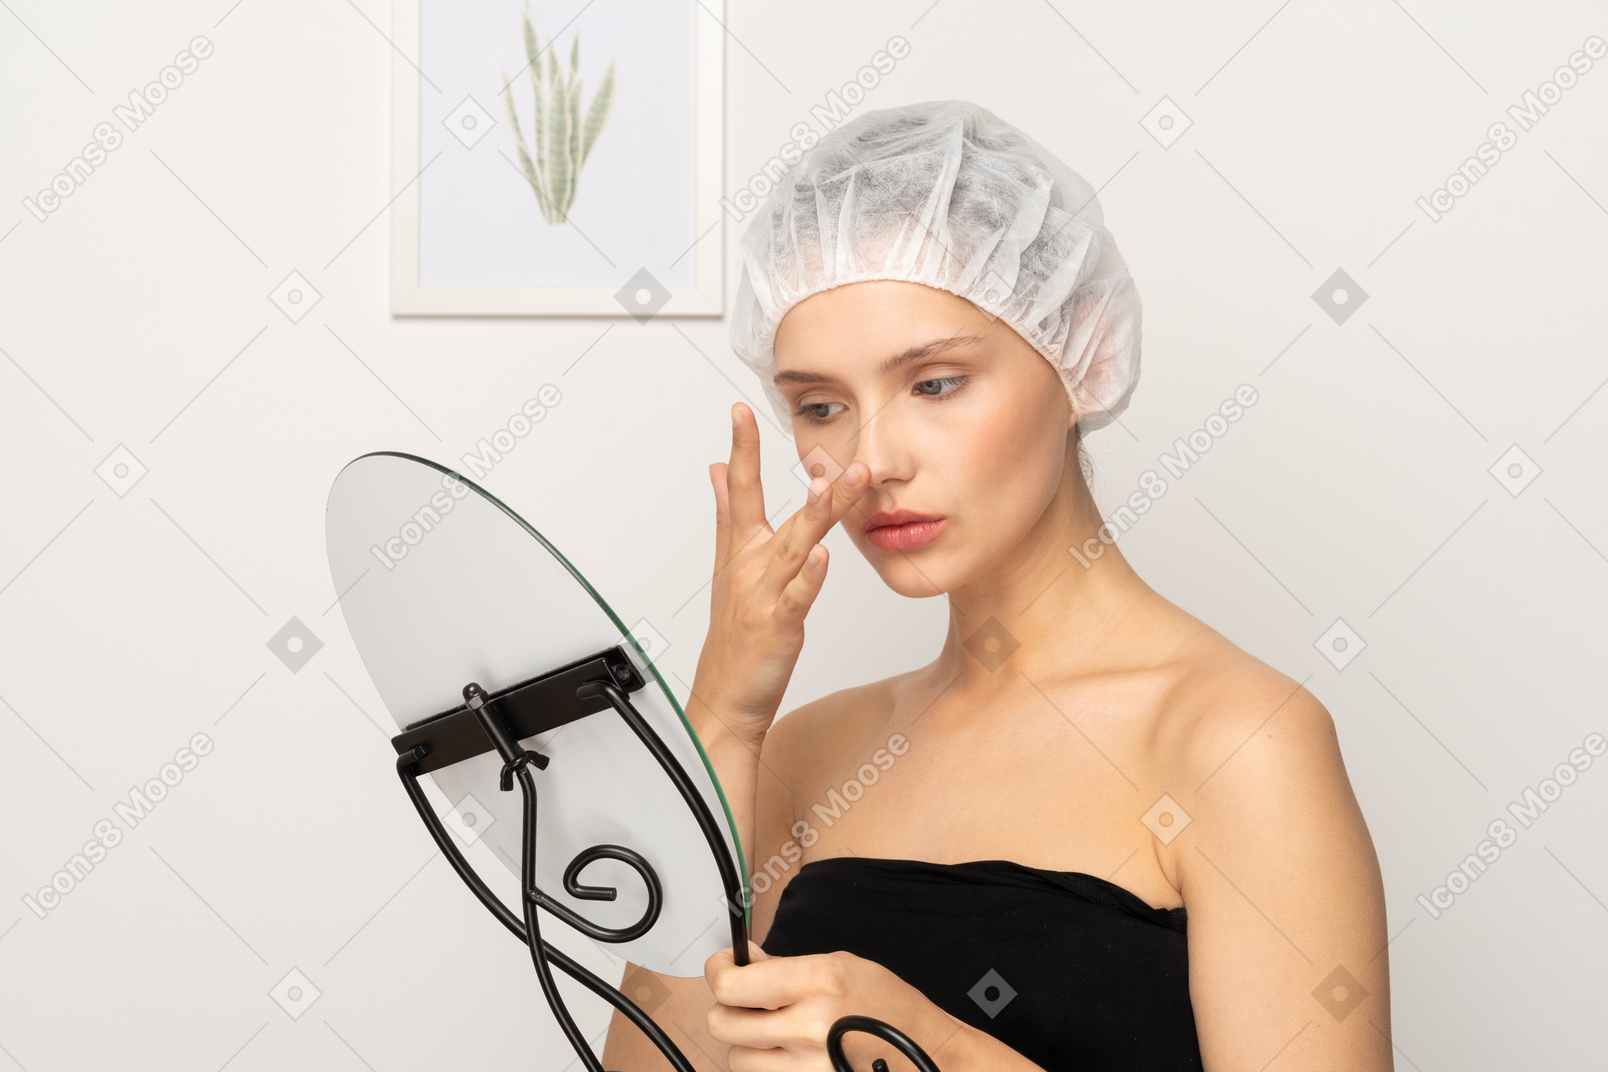 Woman in surgical cap holding mirror and touching her nose